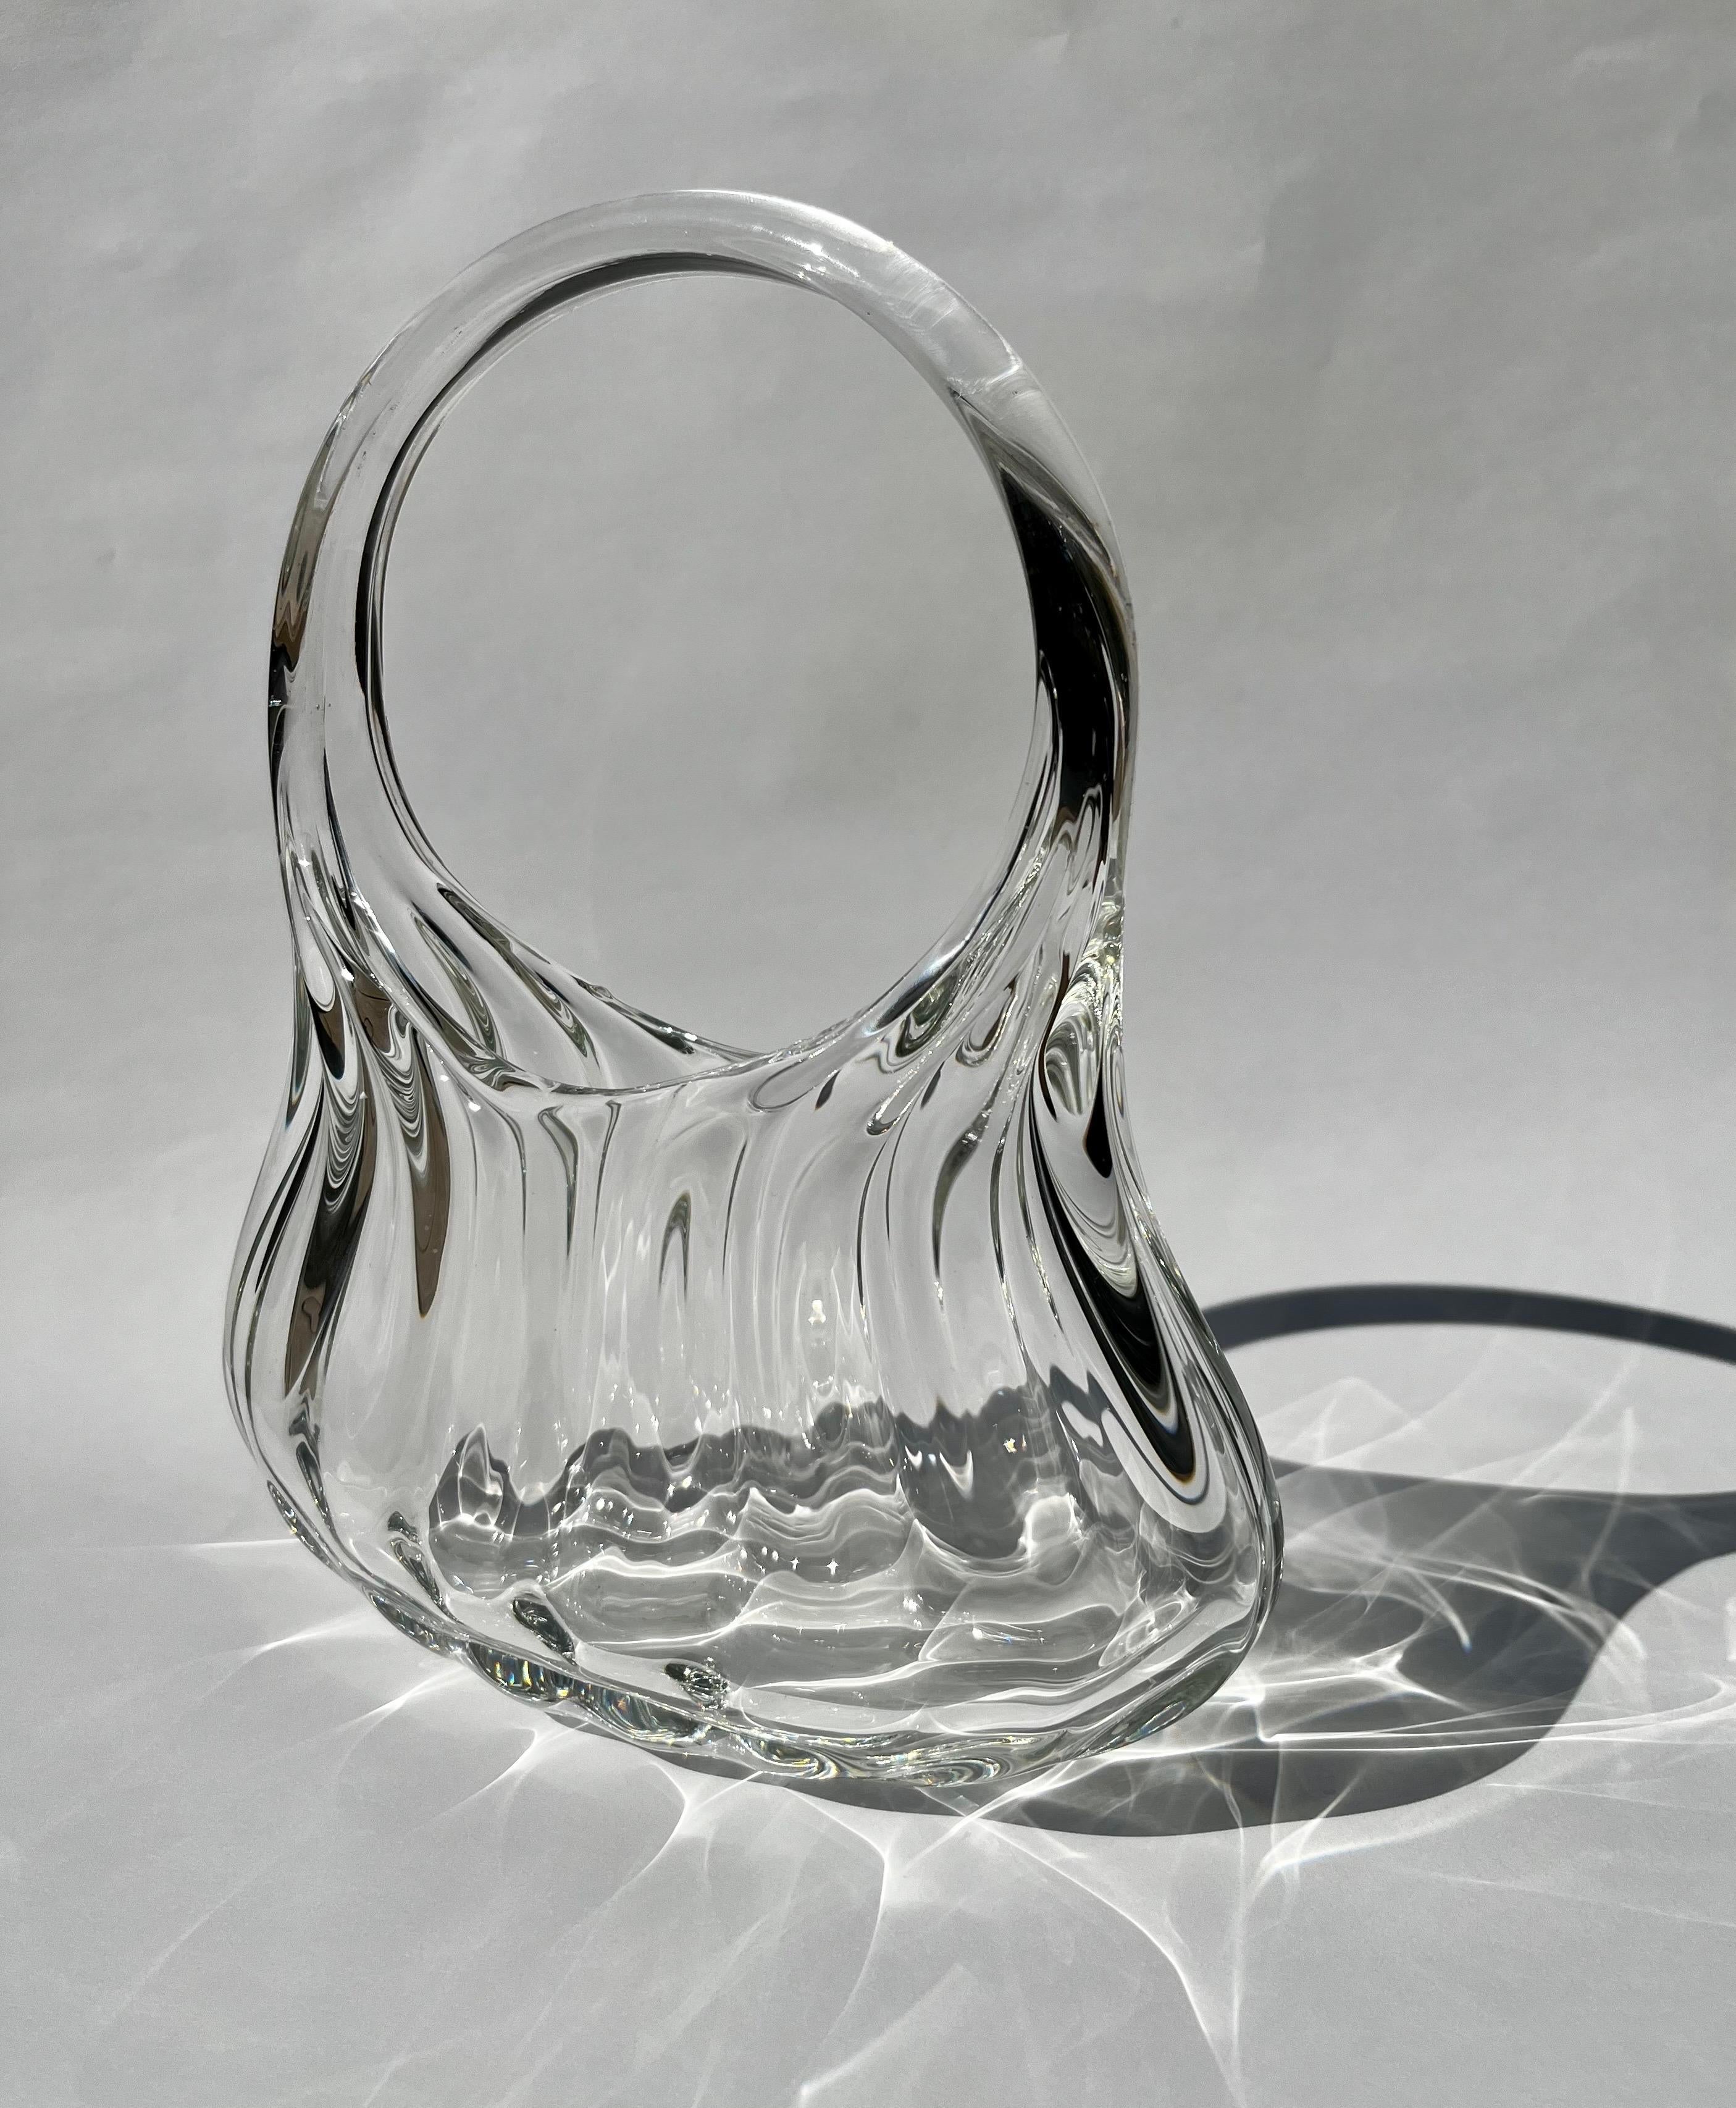 This bag was designed to maximize the refractory quality of glass. It featured soft wavy ridges on it’s surface which bend, throw and magnify light in heavenly arcs and rainbows. No other material shapes and manipulates light quite like glass does,